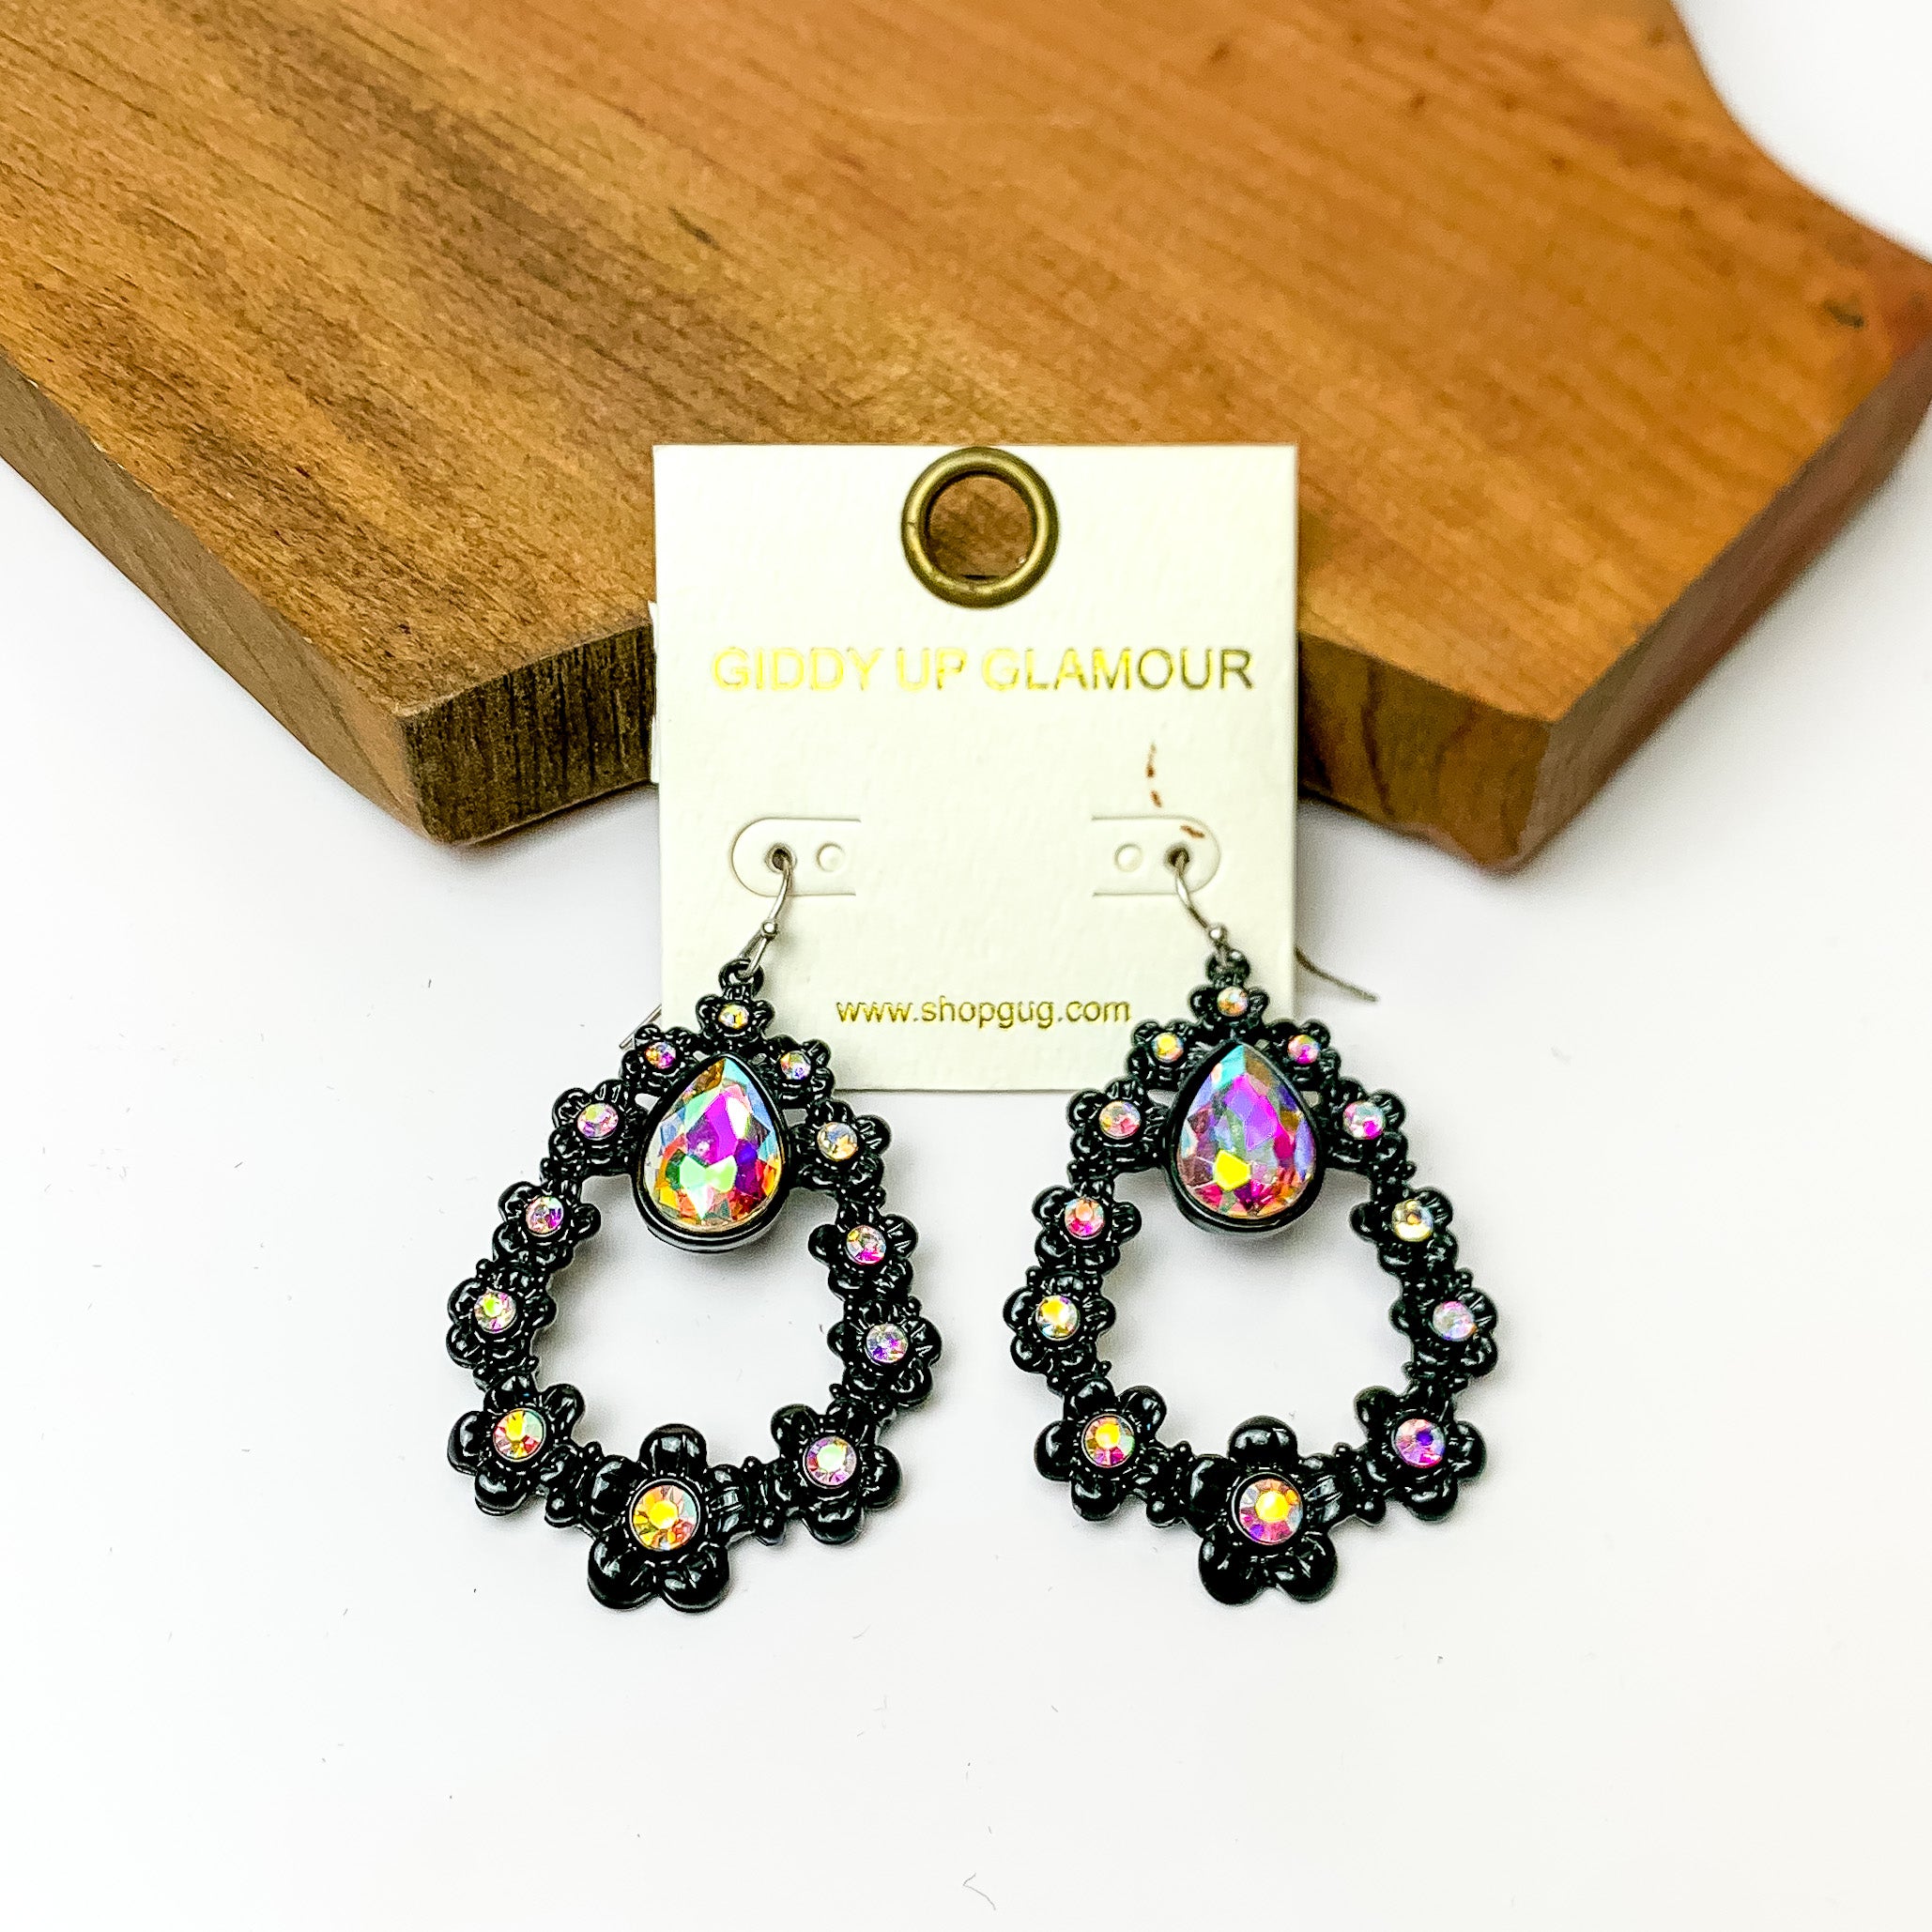 Black open drop earrings with ab crystals and connecting flowers. Pictured on a white background with a wood piece at the top.